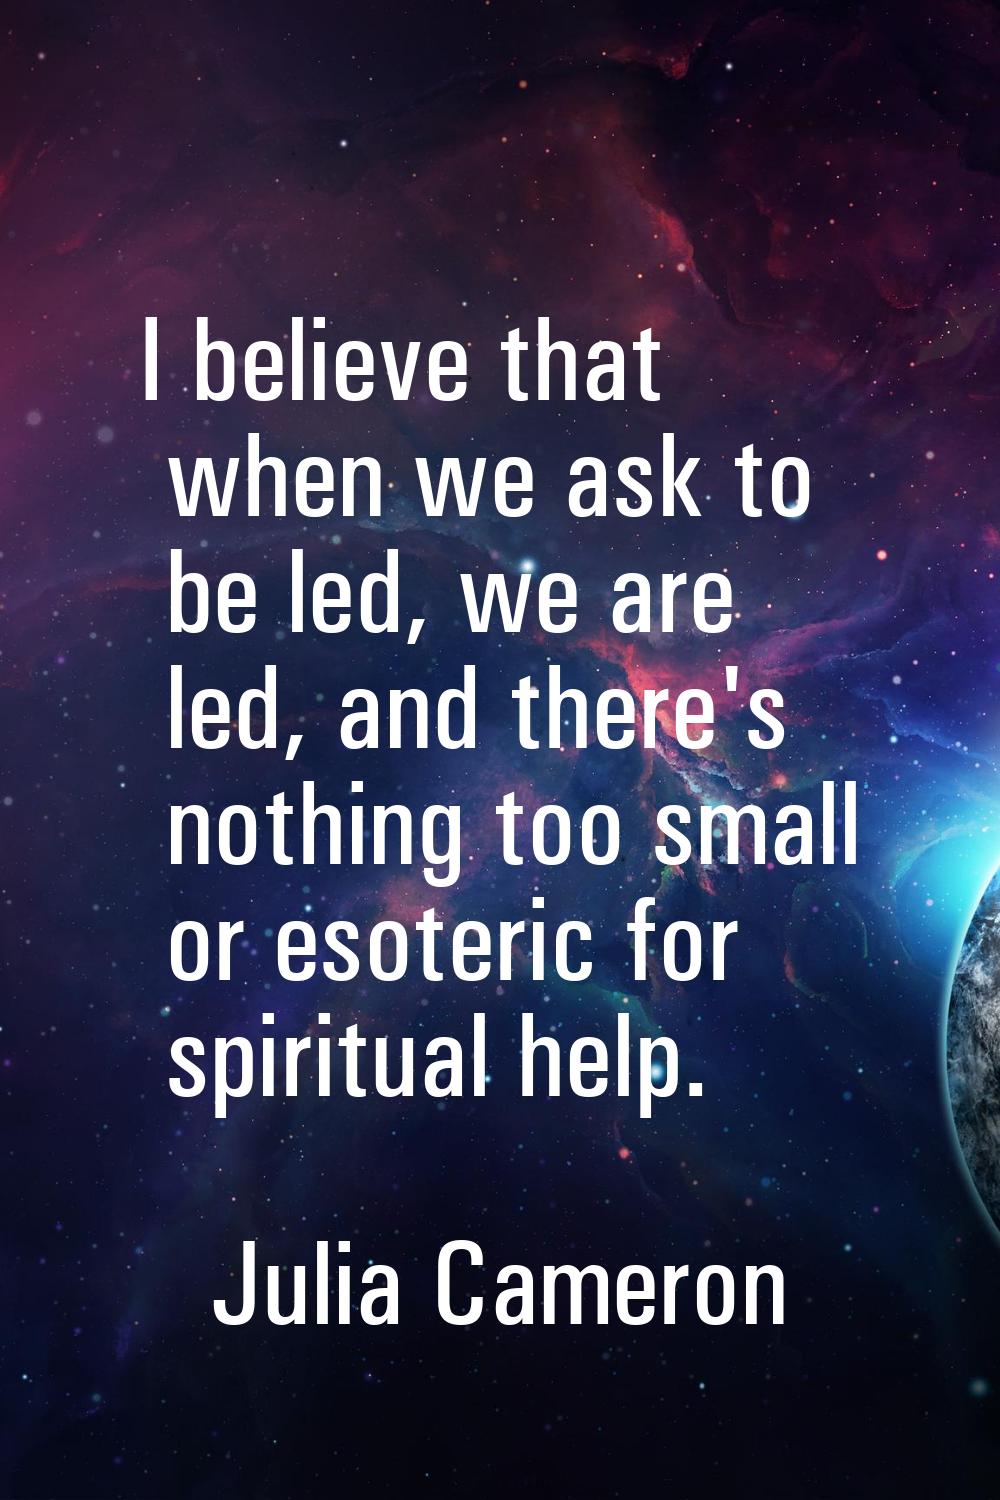 I believe that when we ask to be led, we are led, and there's nothing too small or esoteric for spi